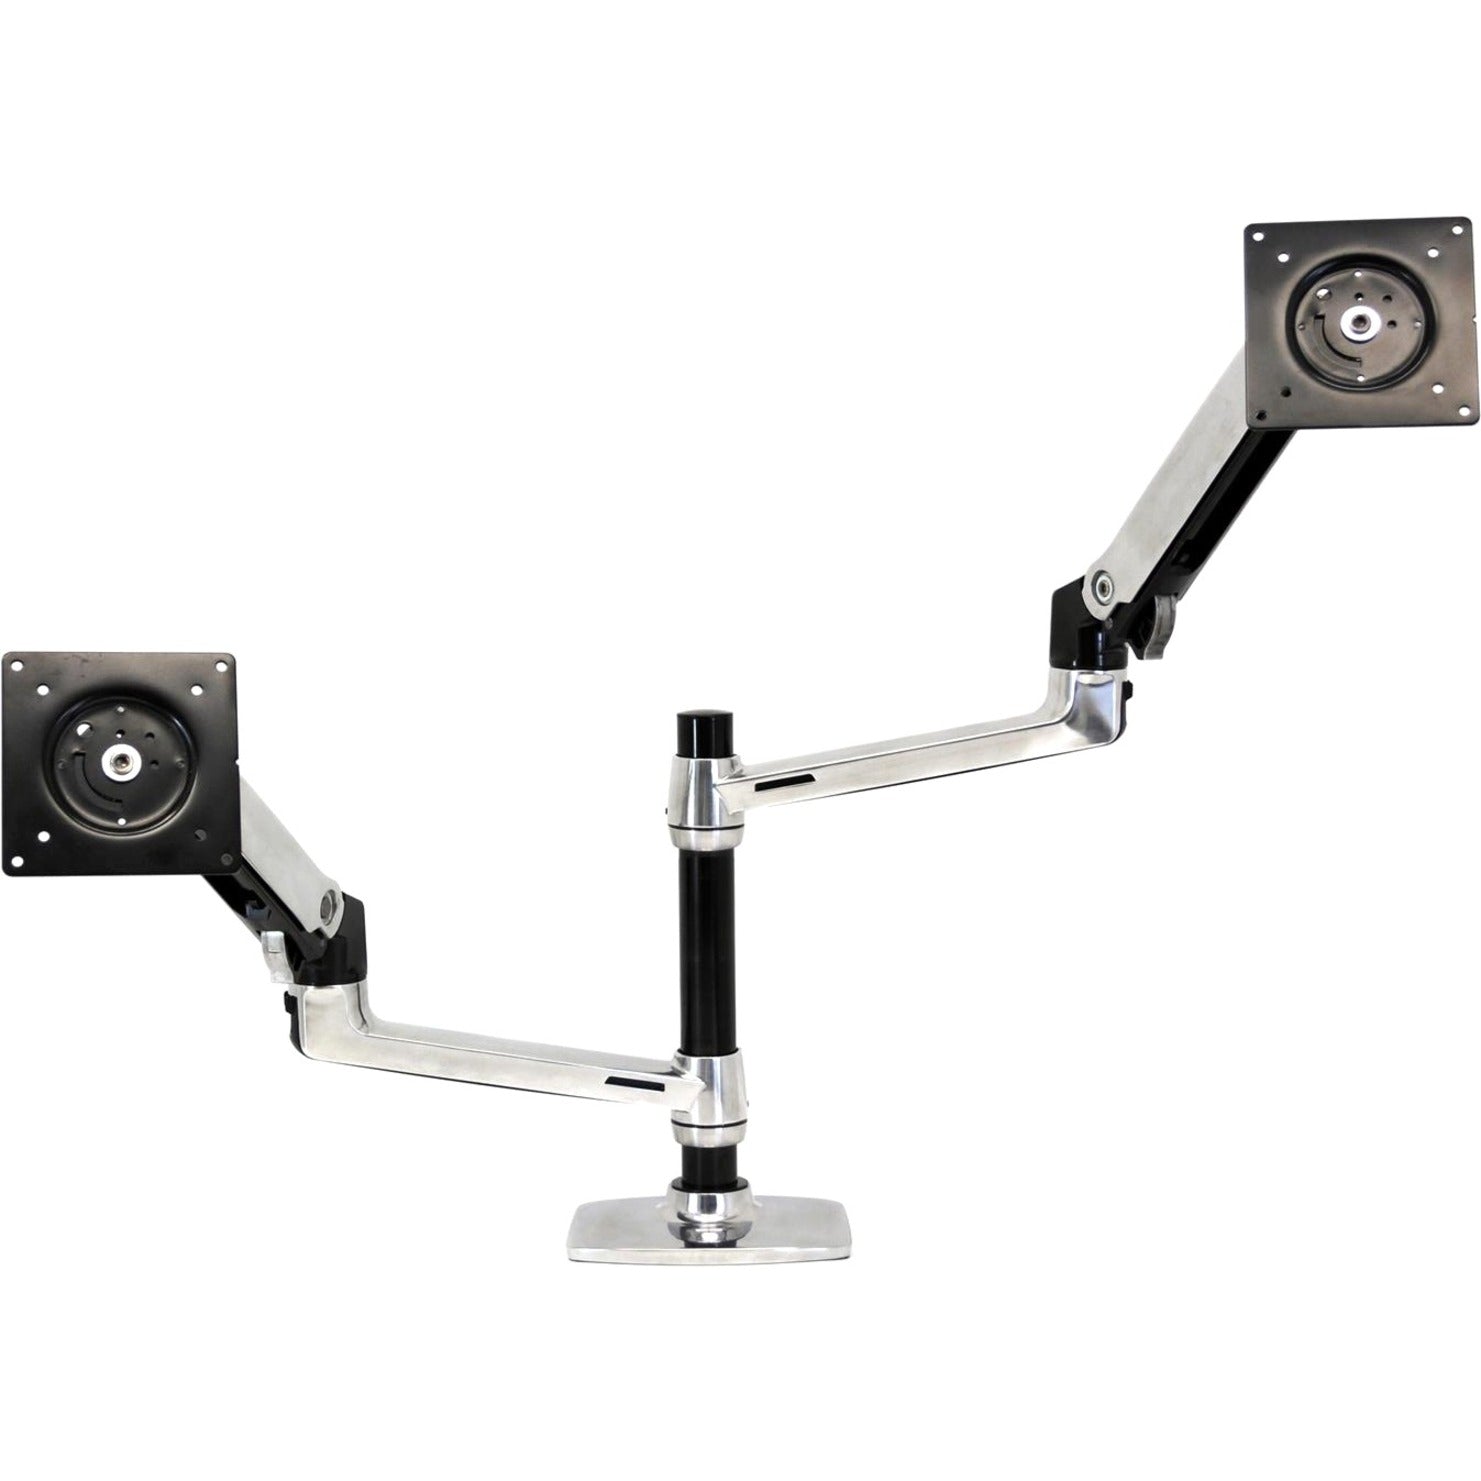 Ergotron 45 248 026 LX Dual Stacking Arm Mounting Arm for Notebook, 40 lb Maximum Load Capacity